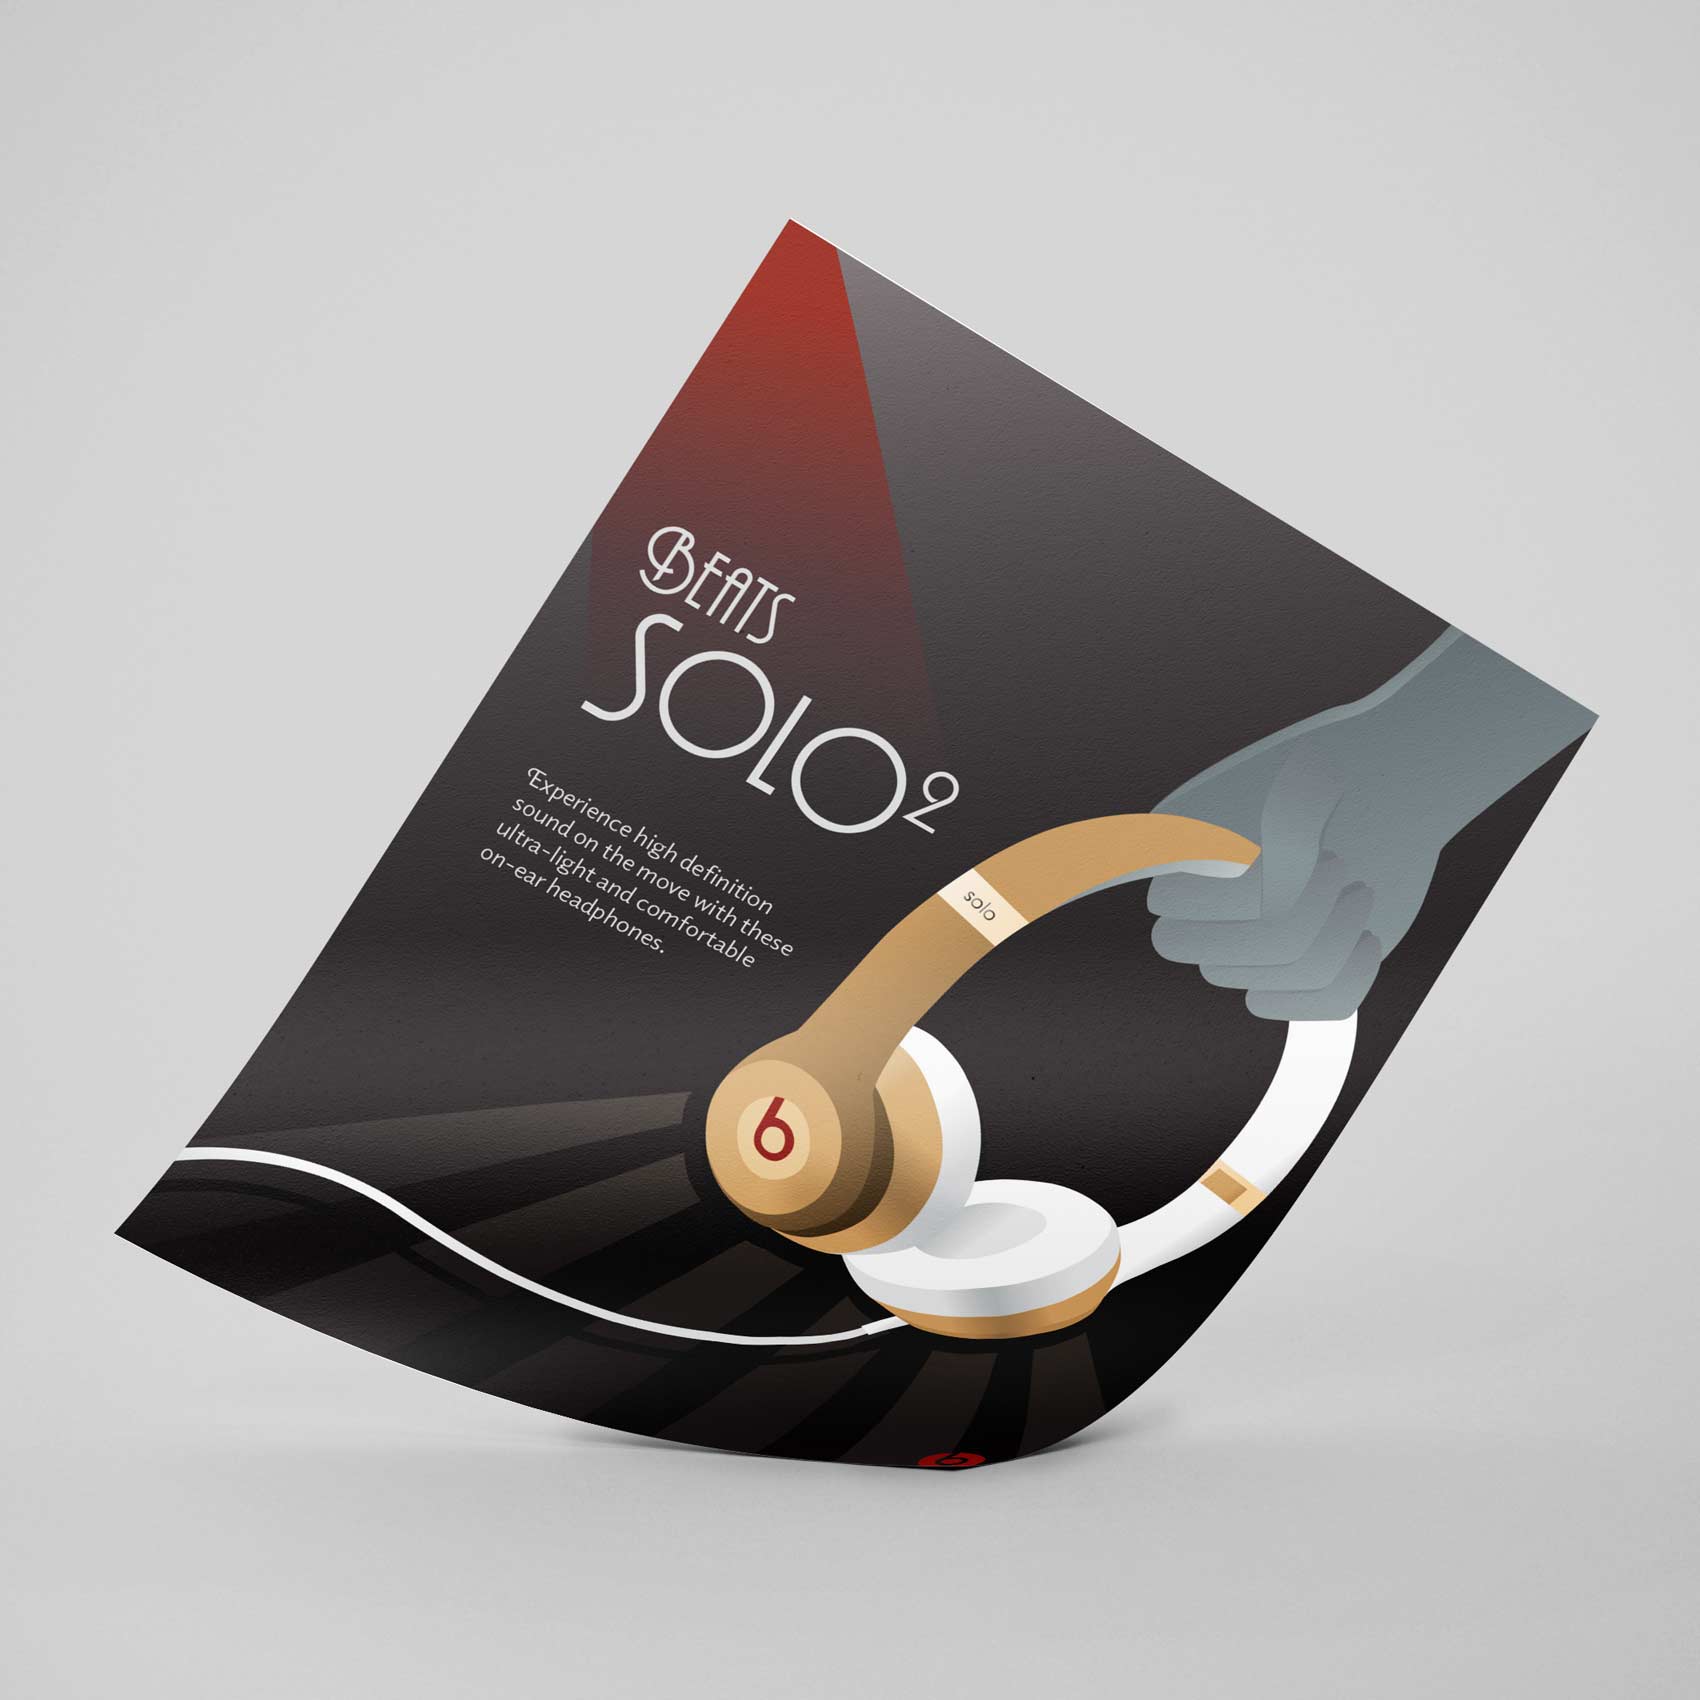 This is a poster concept for beats solo 2 headphones. There is an illustration of a hand holding the headphones in an art deco style.